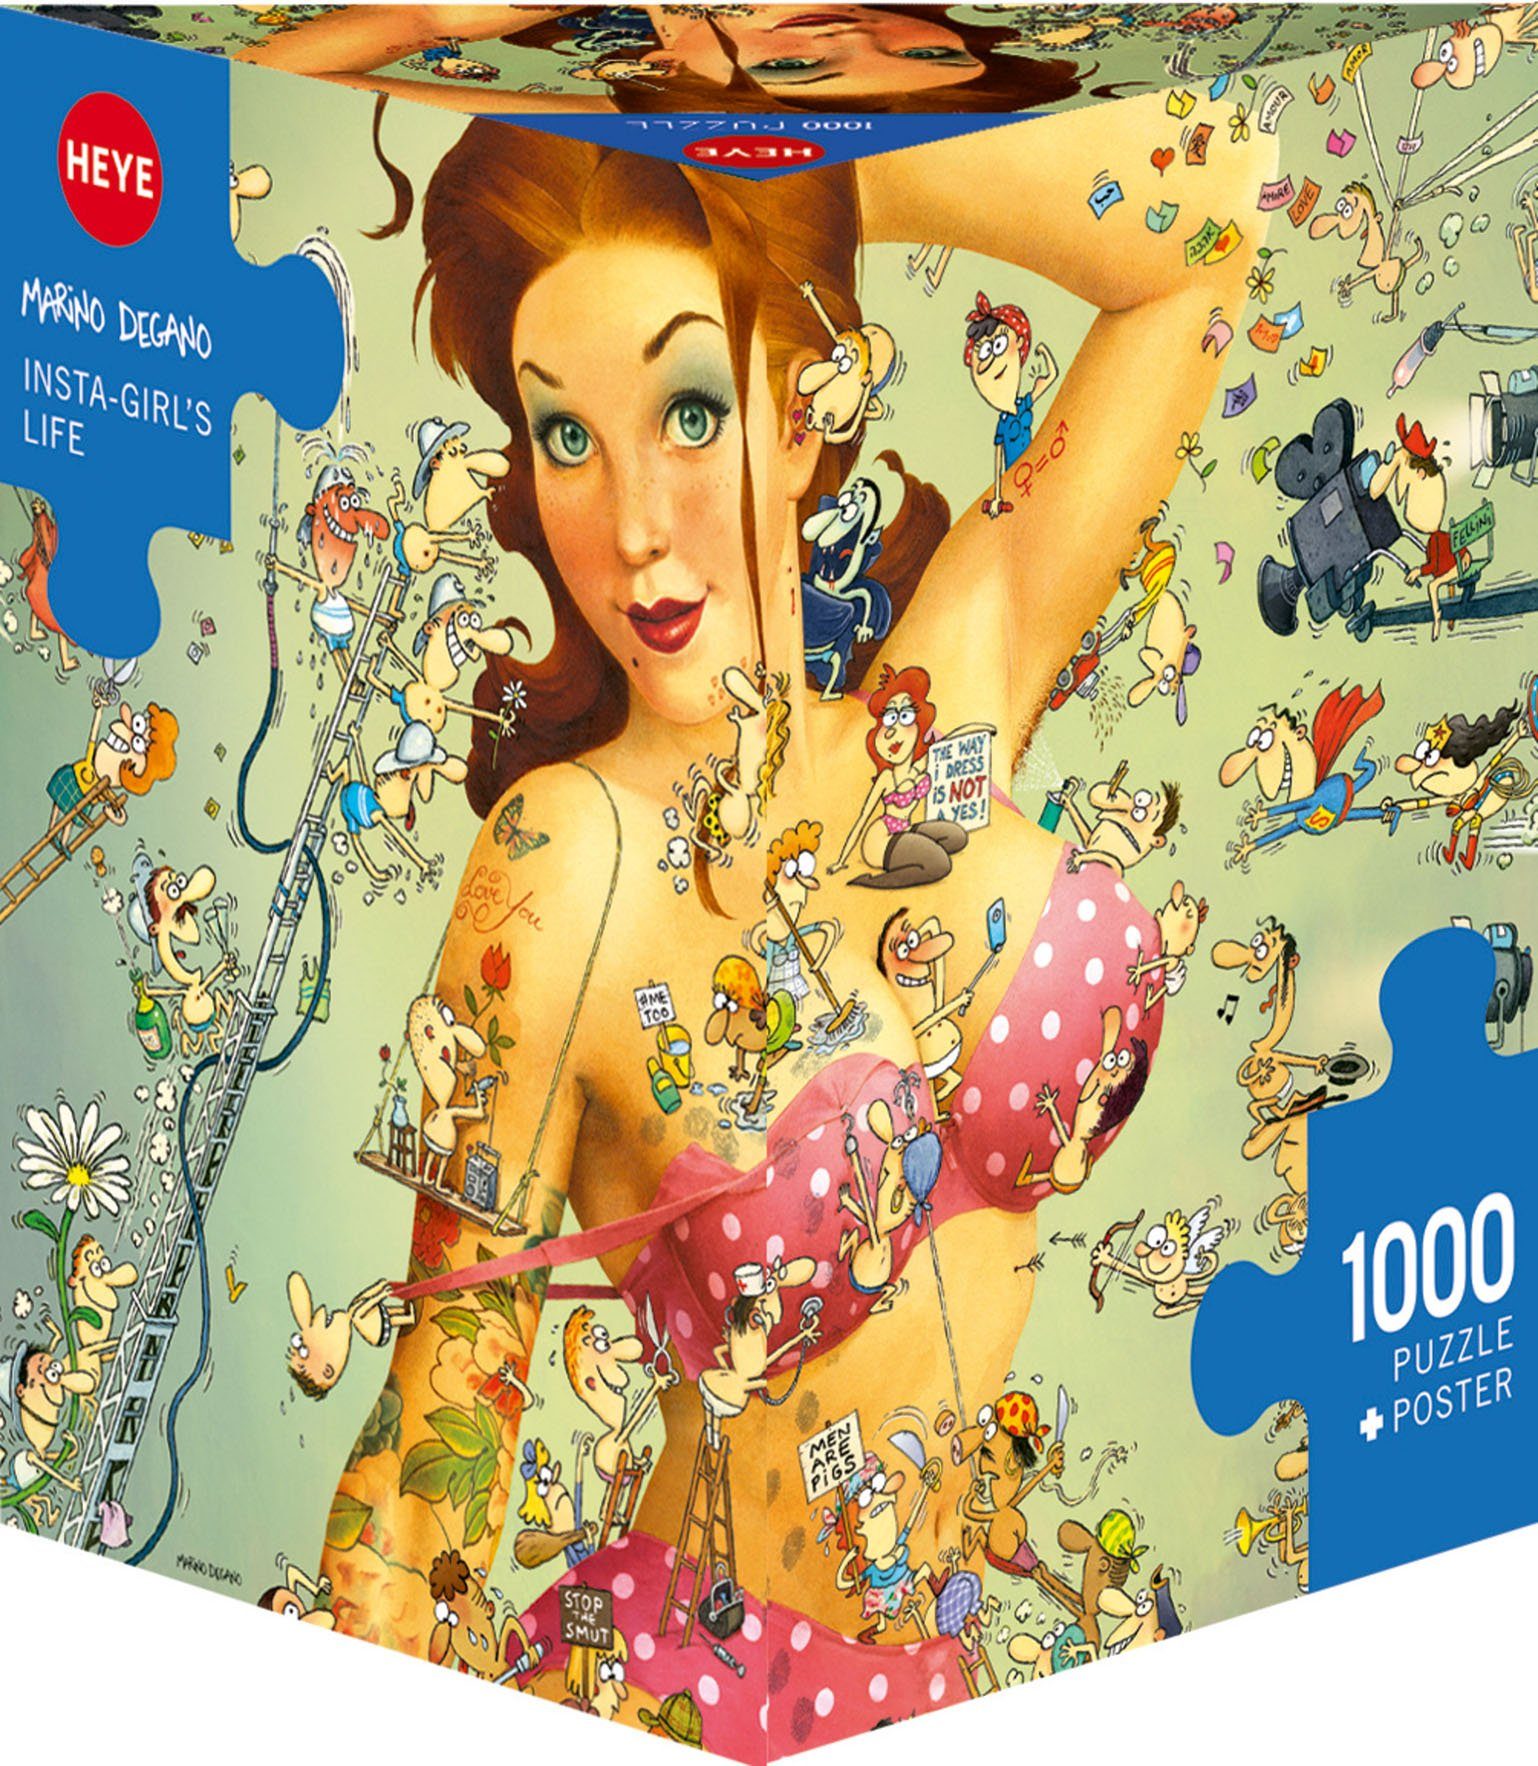 Europe Puzzleteile, Puzzle 1000 Insta-Girl´s in Made HEYE Life,